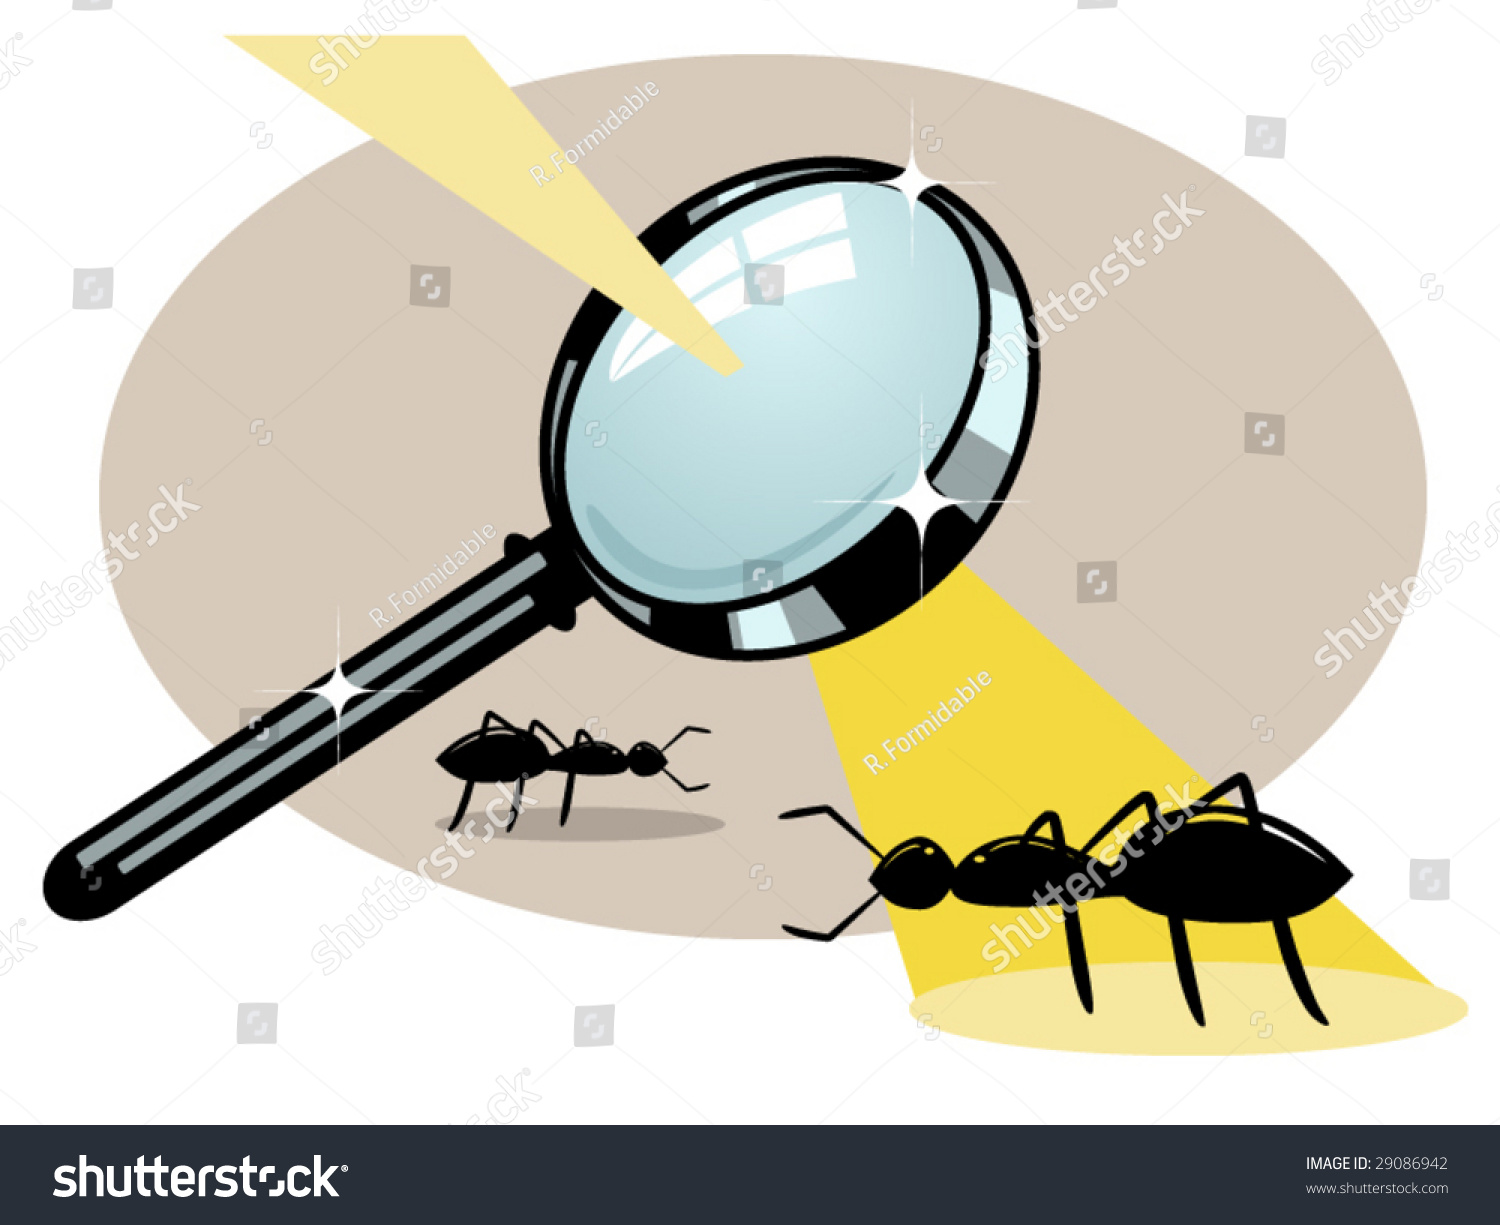 Image result for frying an ant with magnifying glass